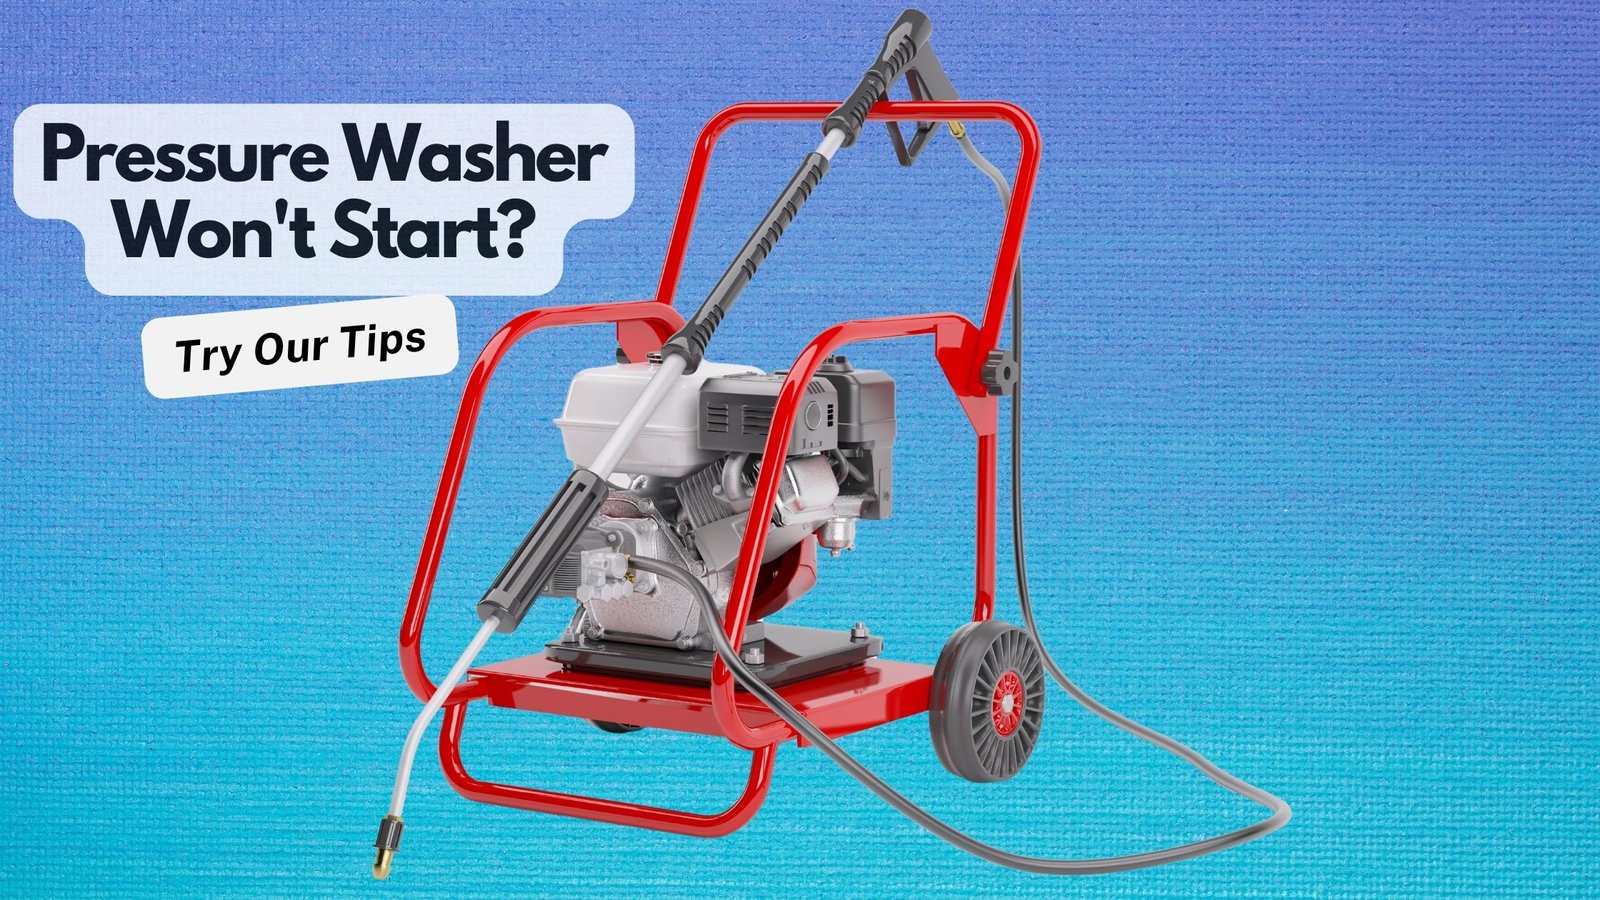 Pressure Washer Won't Start - Try These Tips